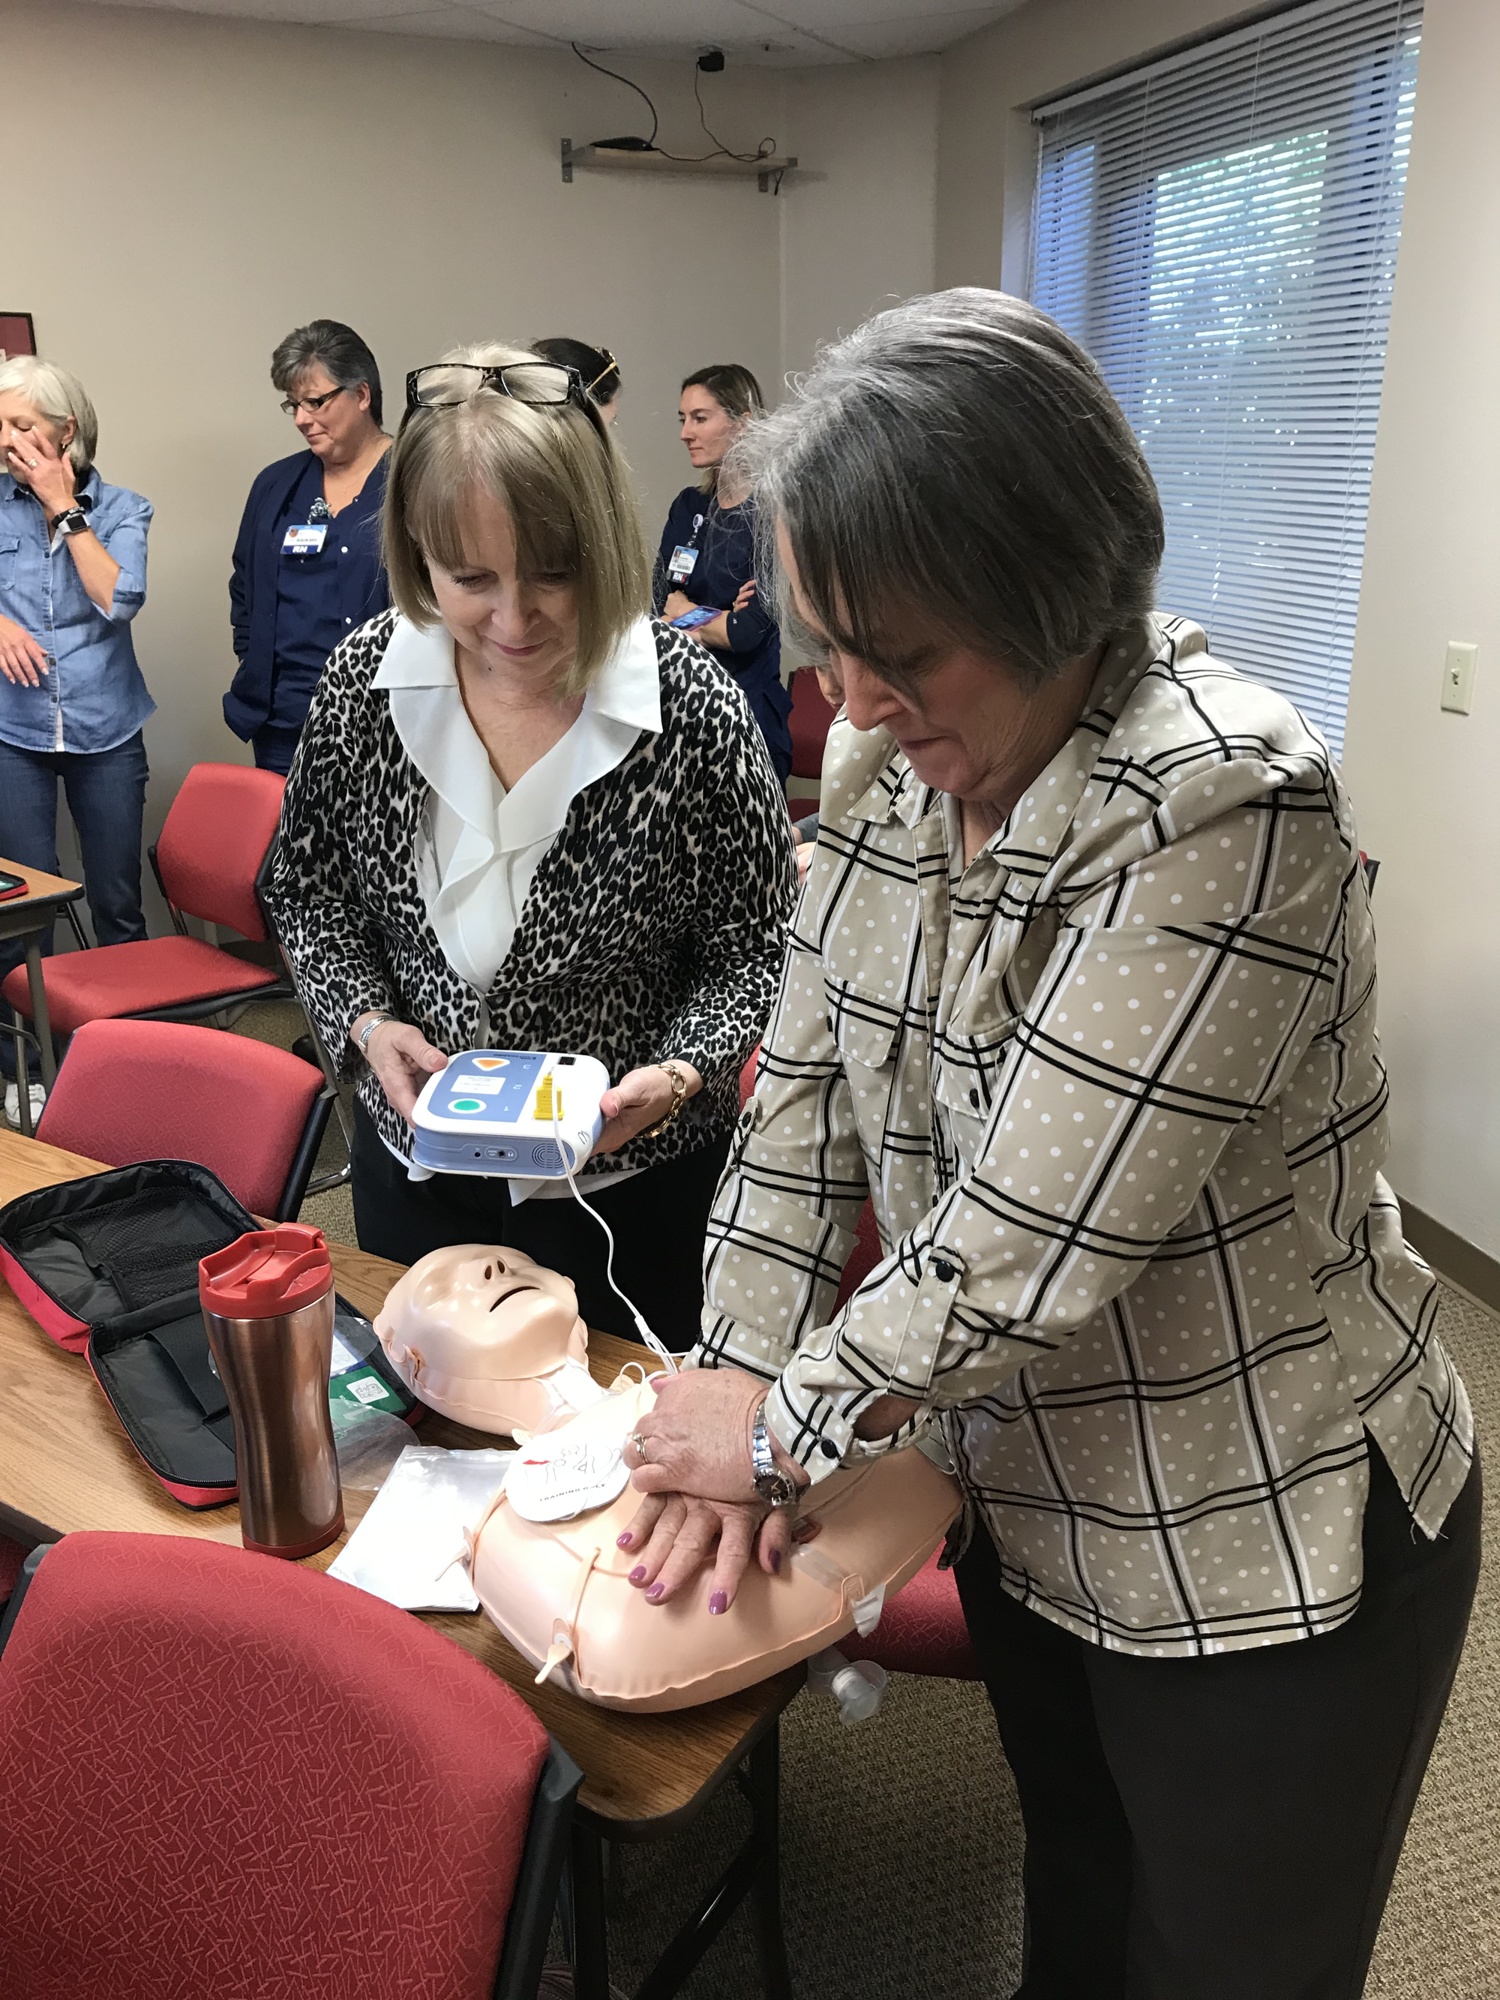 Two women practice CPR at a training session held by the Longboat Key Fire Rescue Department. (Courtesy of the Longboat Key Fire Rescue Department)